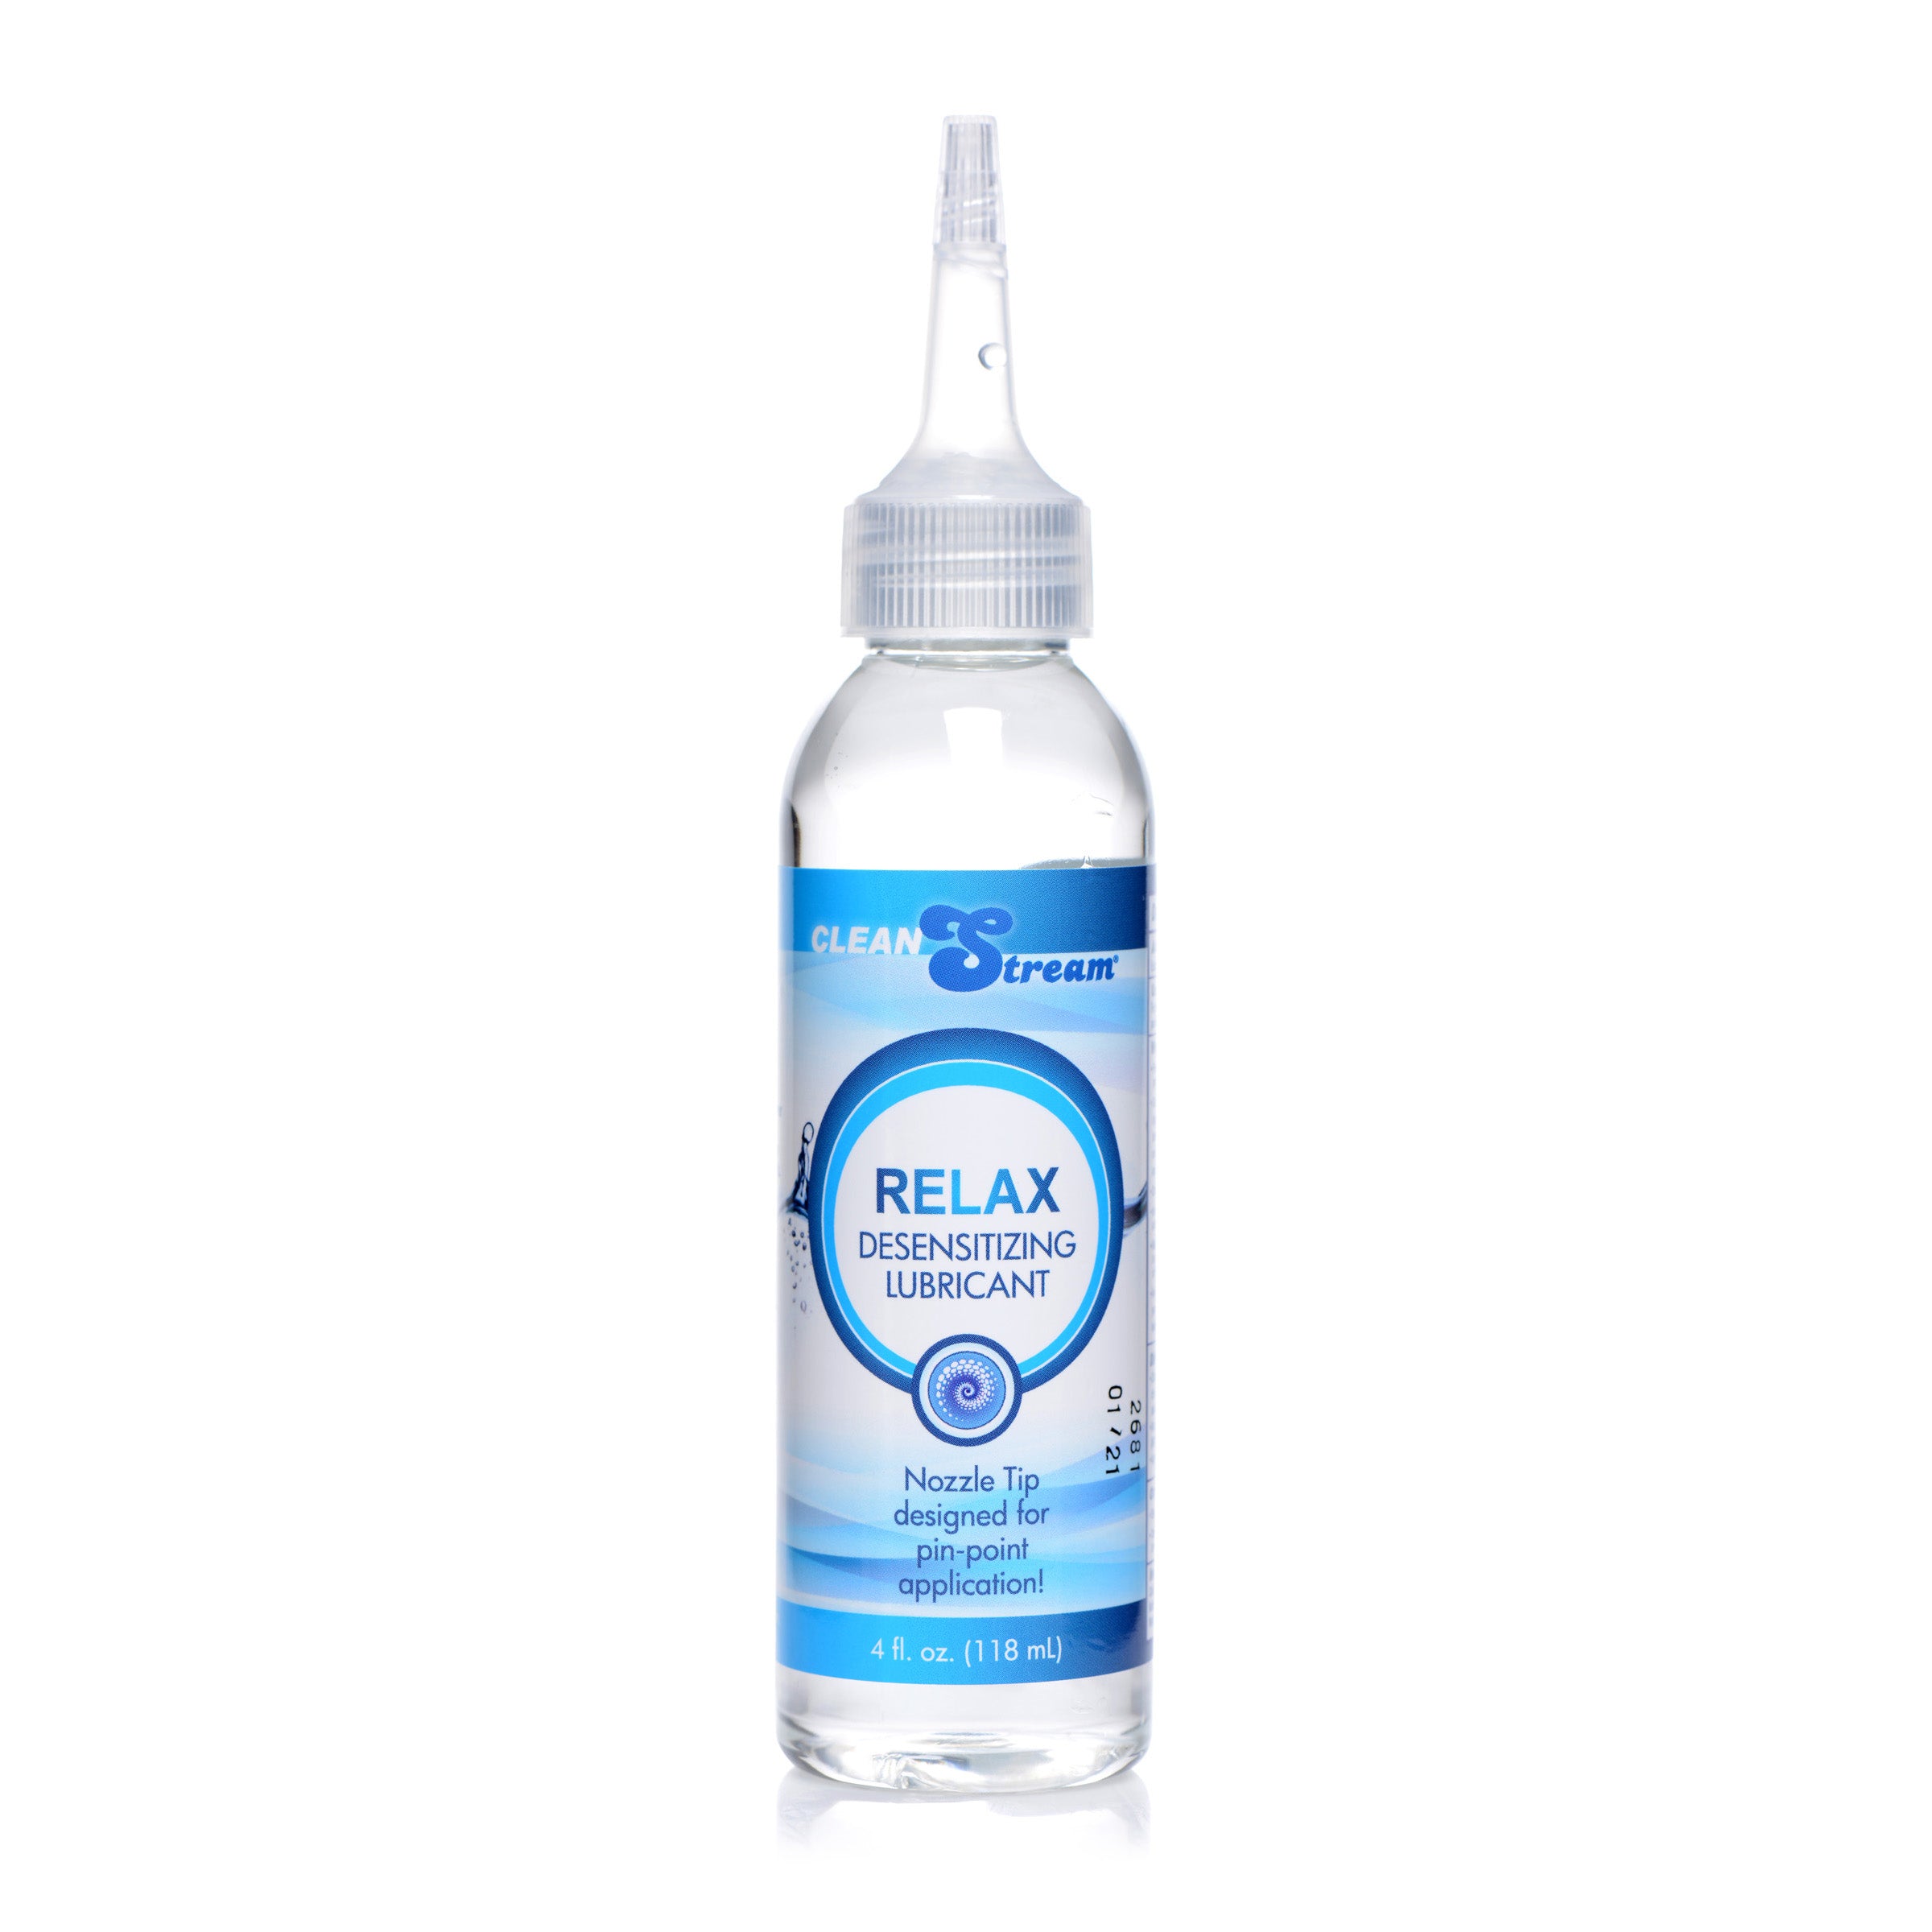 Relax Desensitizing Lubricant With Nozzle Tip - 4oz